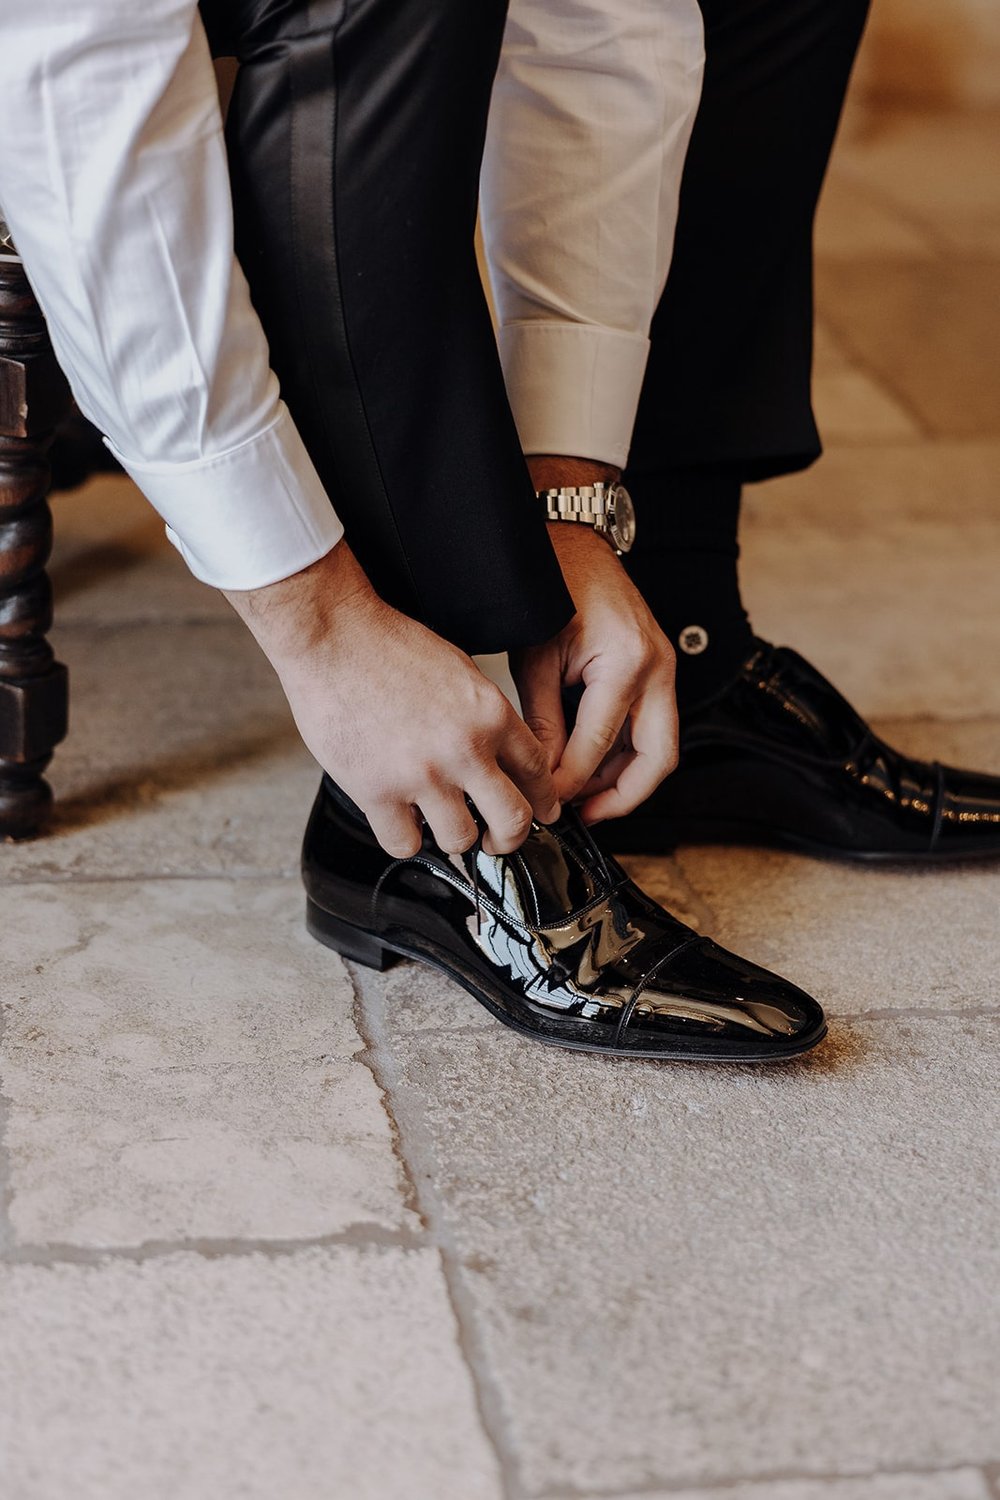 Groom ties his Christian Louboutin patent leather shoes while getting ready for luxury wedding in California